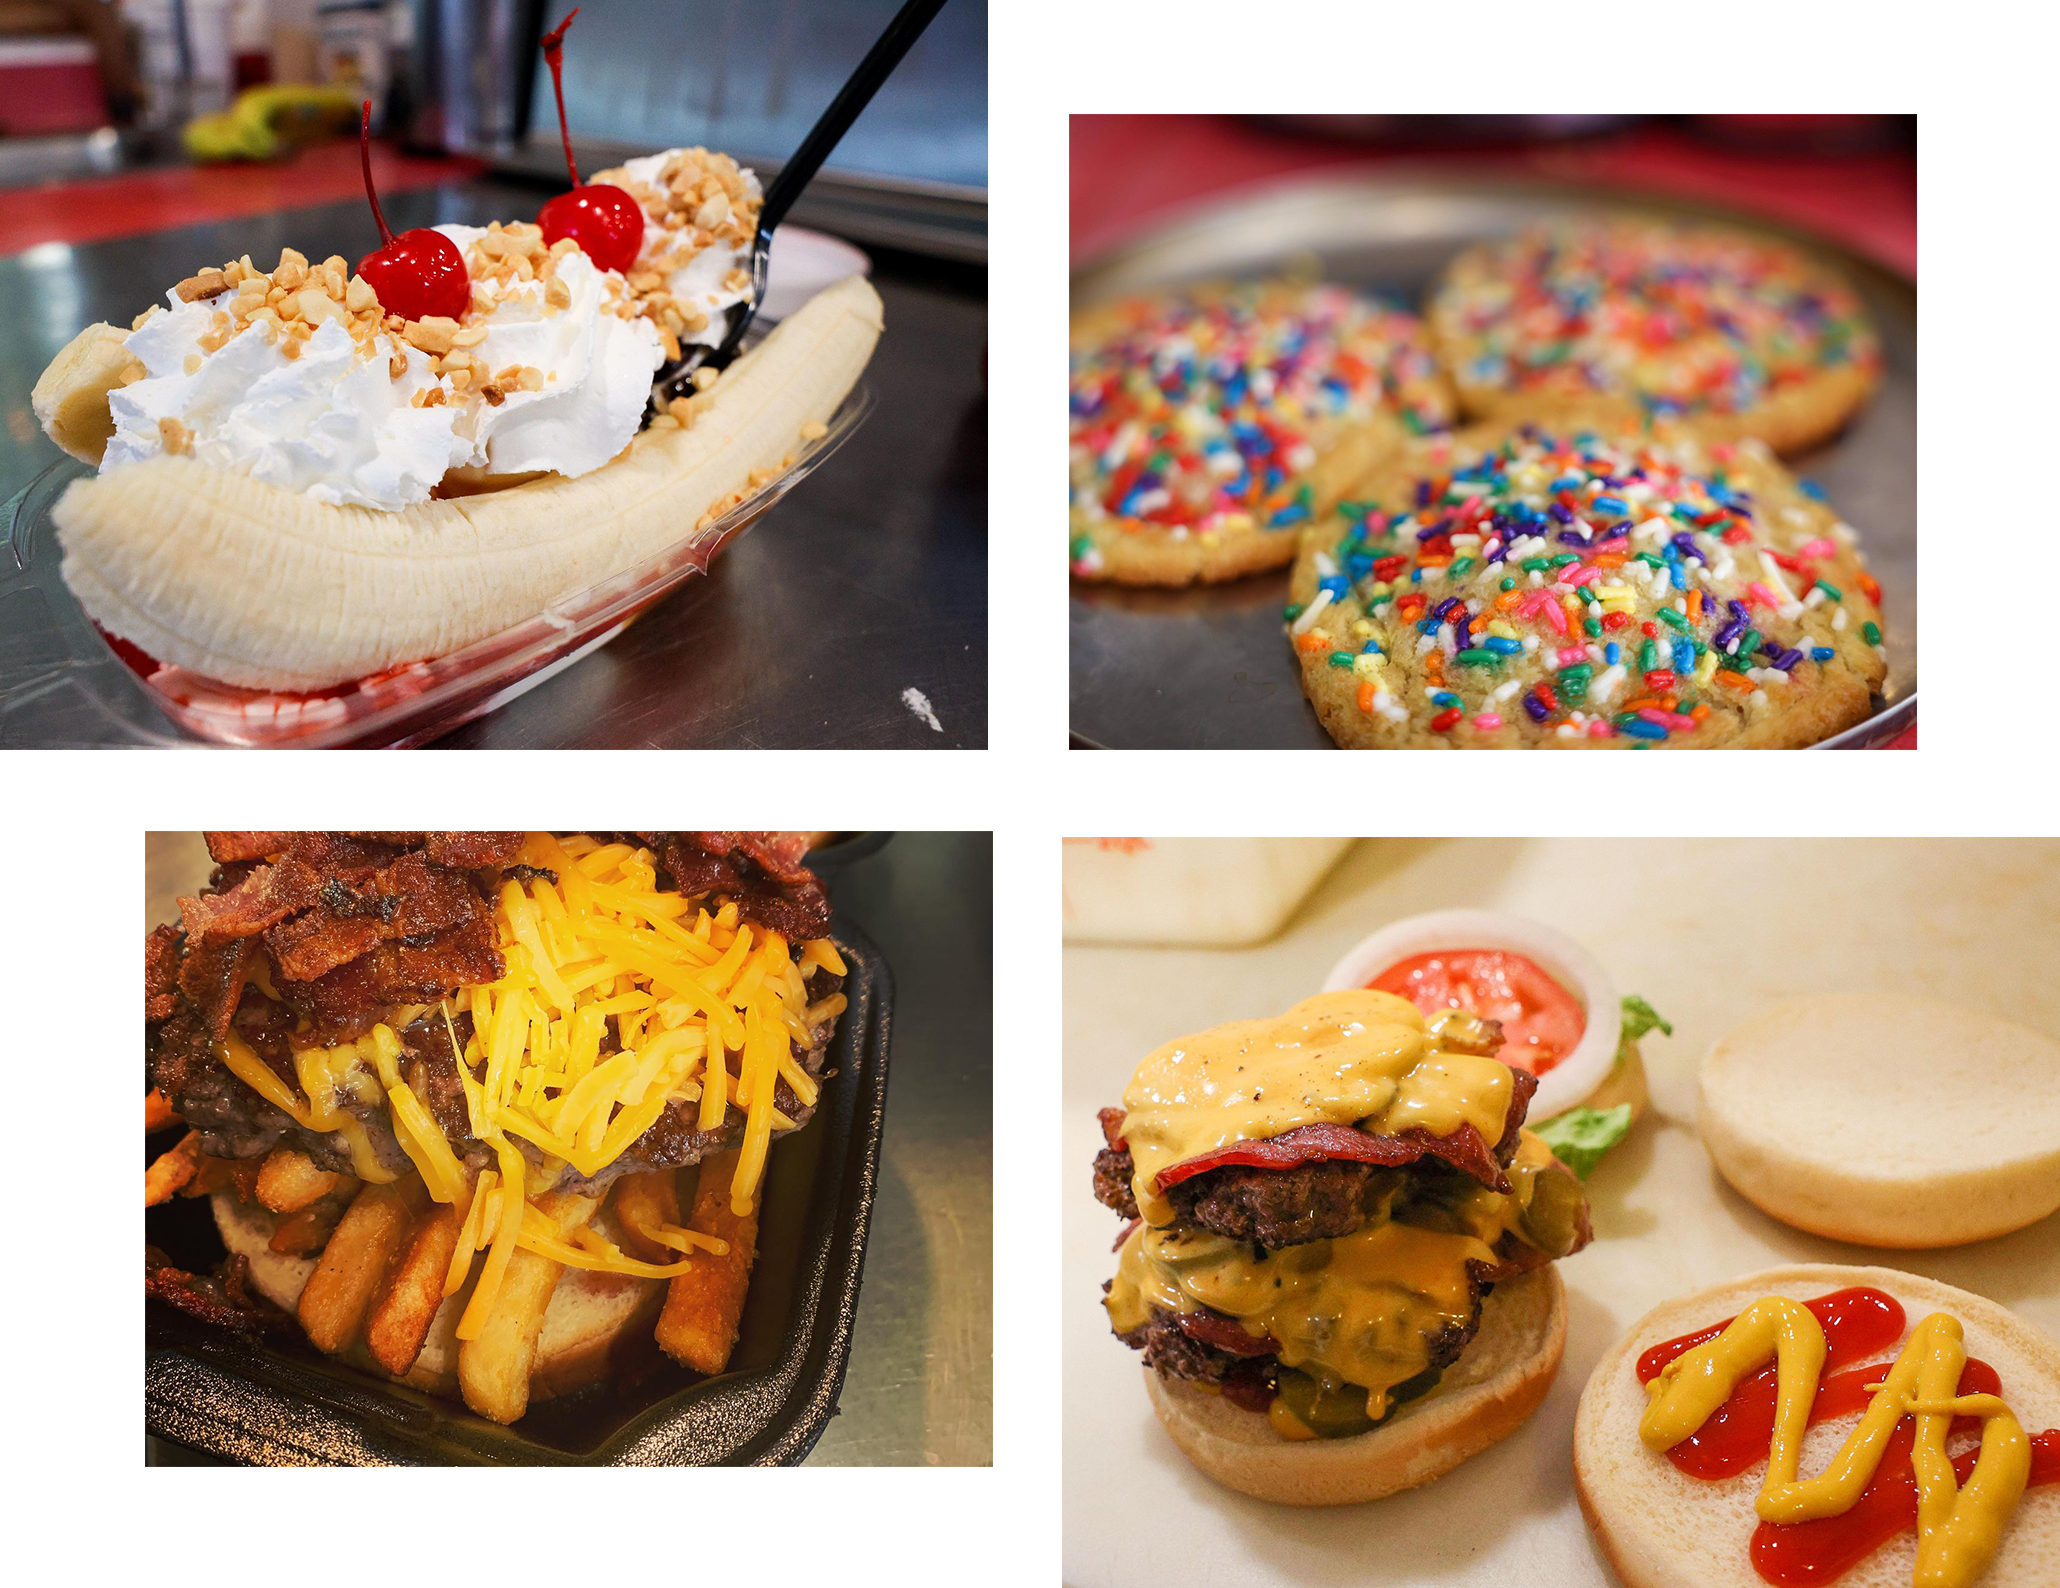 Colorful Cookies, Burger and Fries Meal